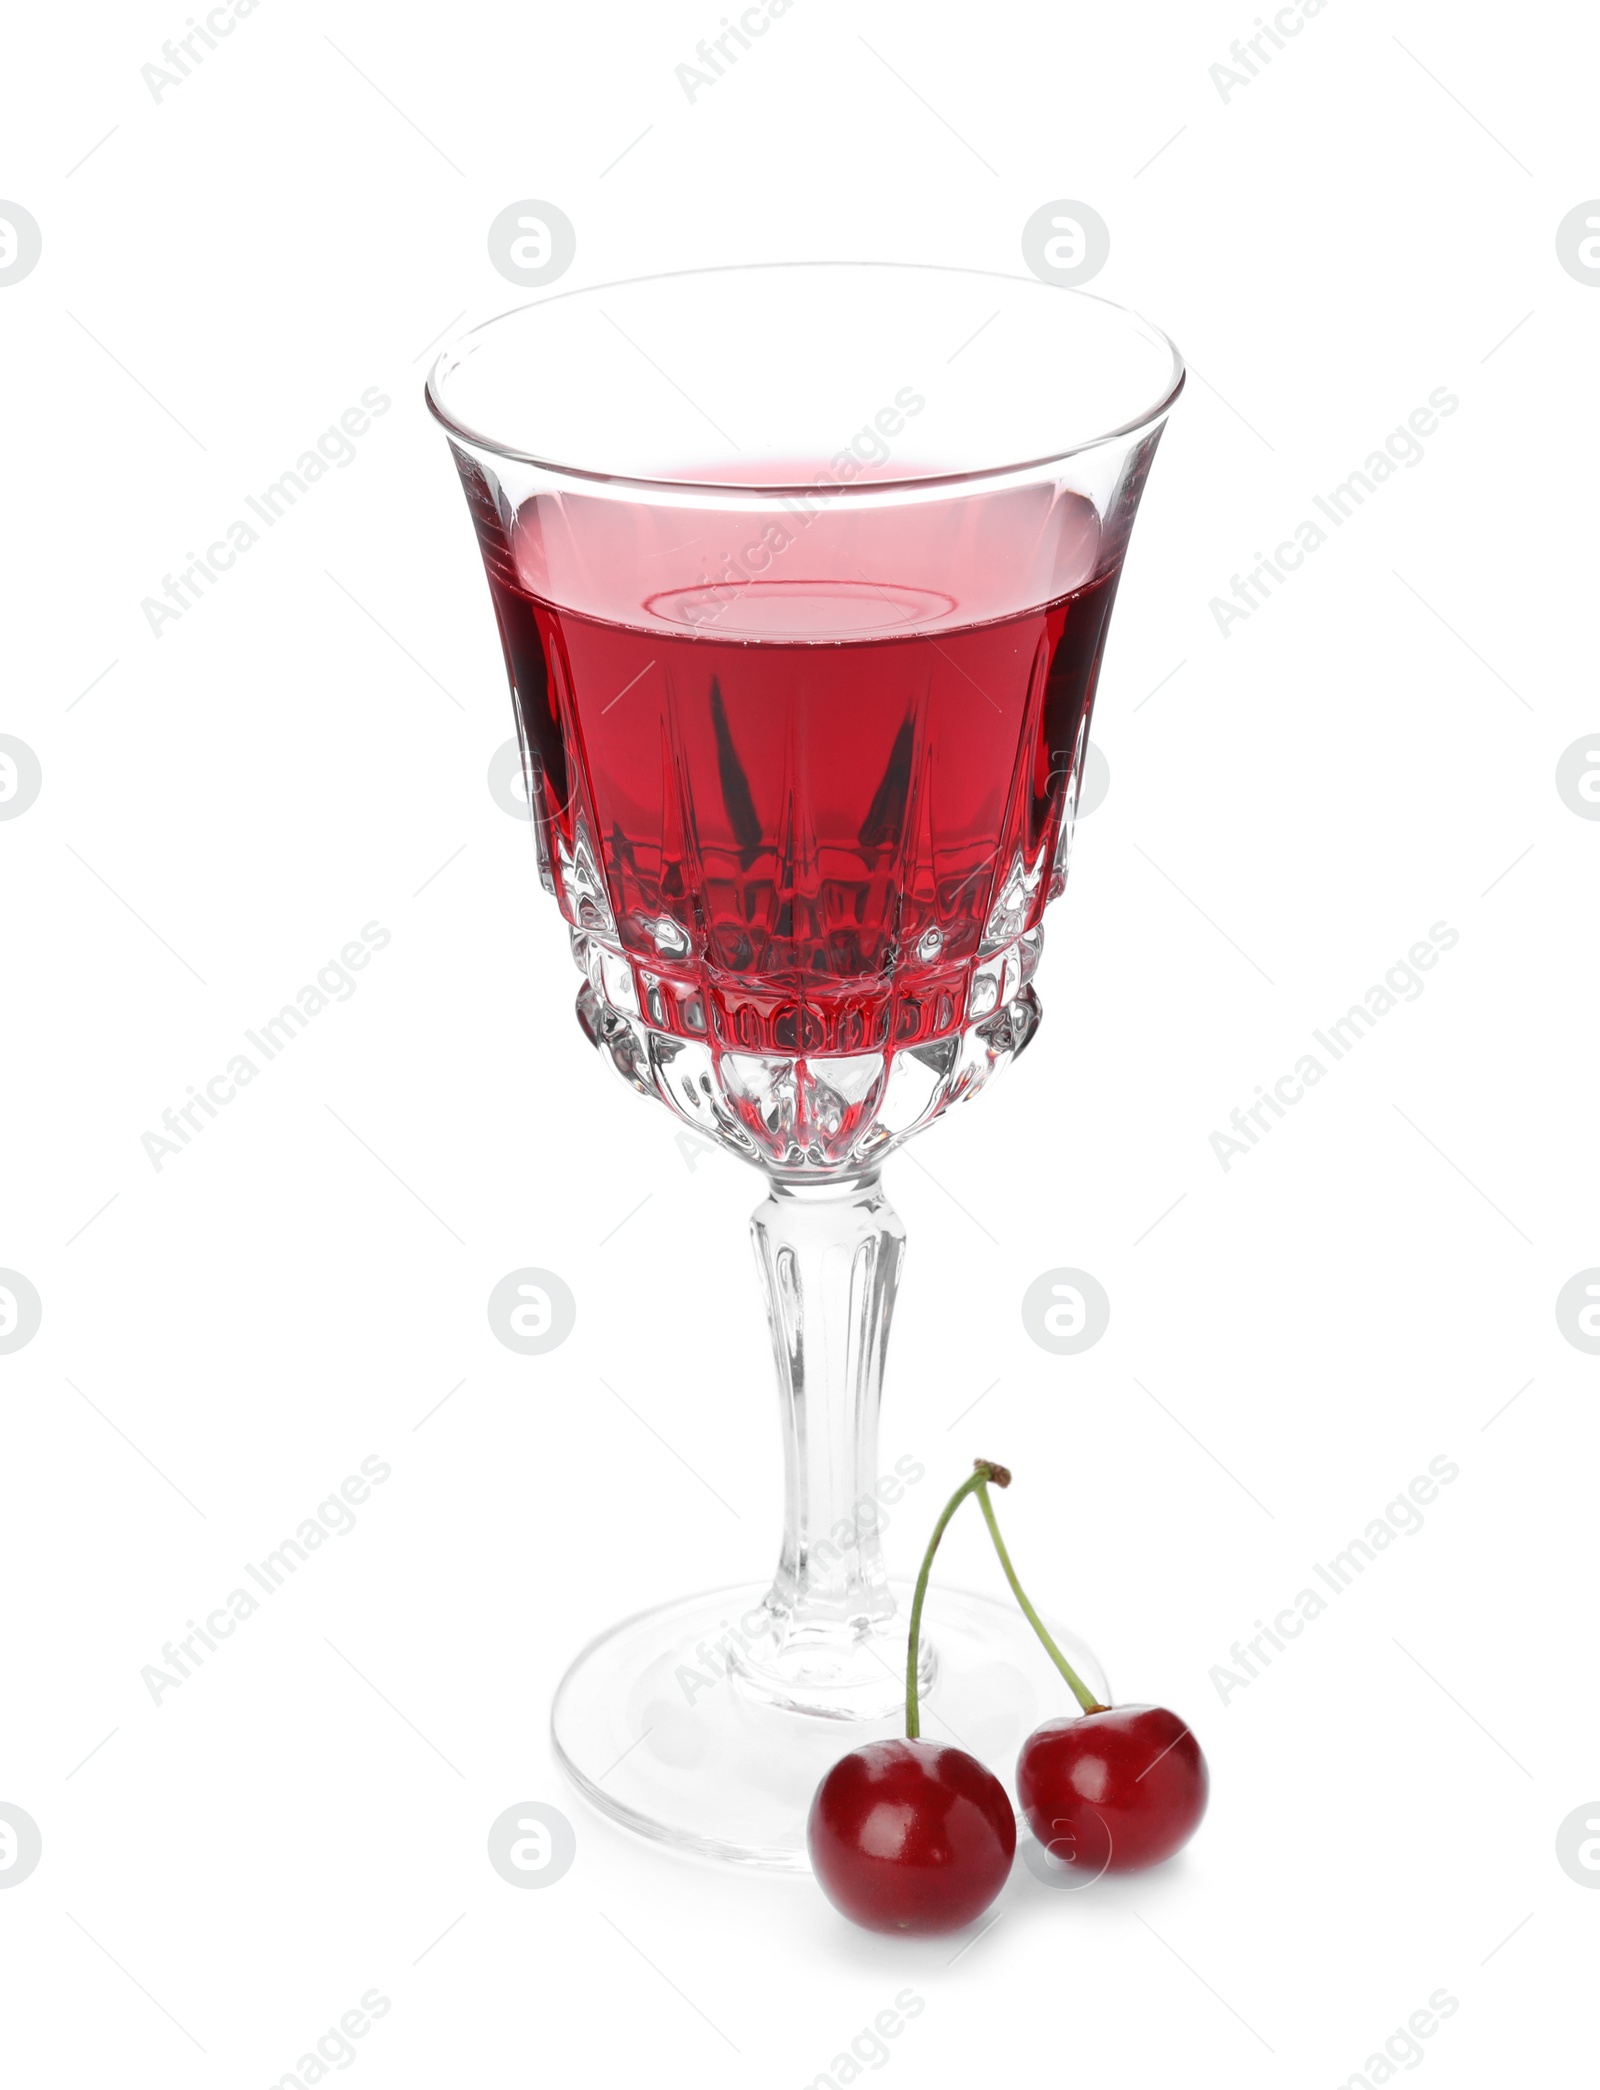 Photo of Delicious cherry wine with ripe juicy berries isolated on white